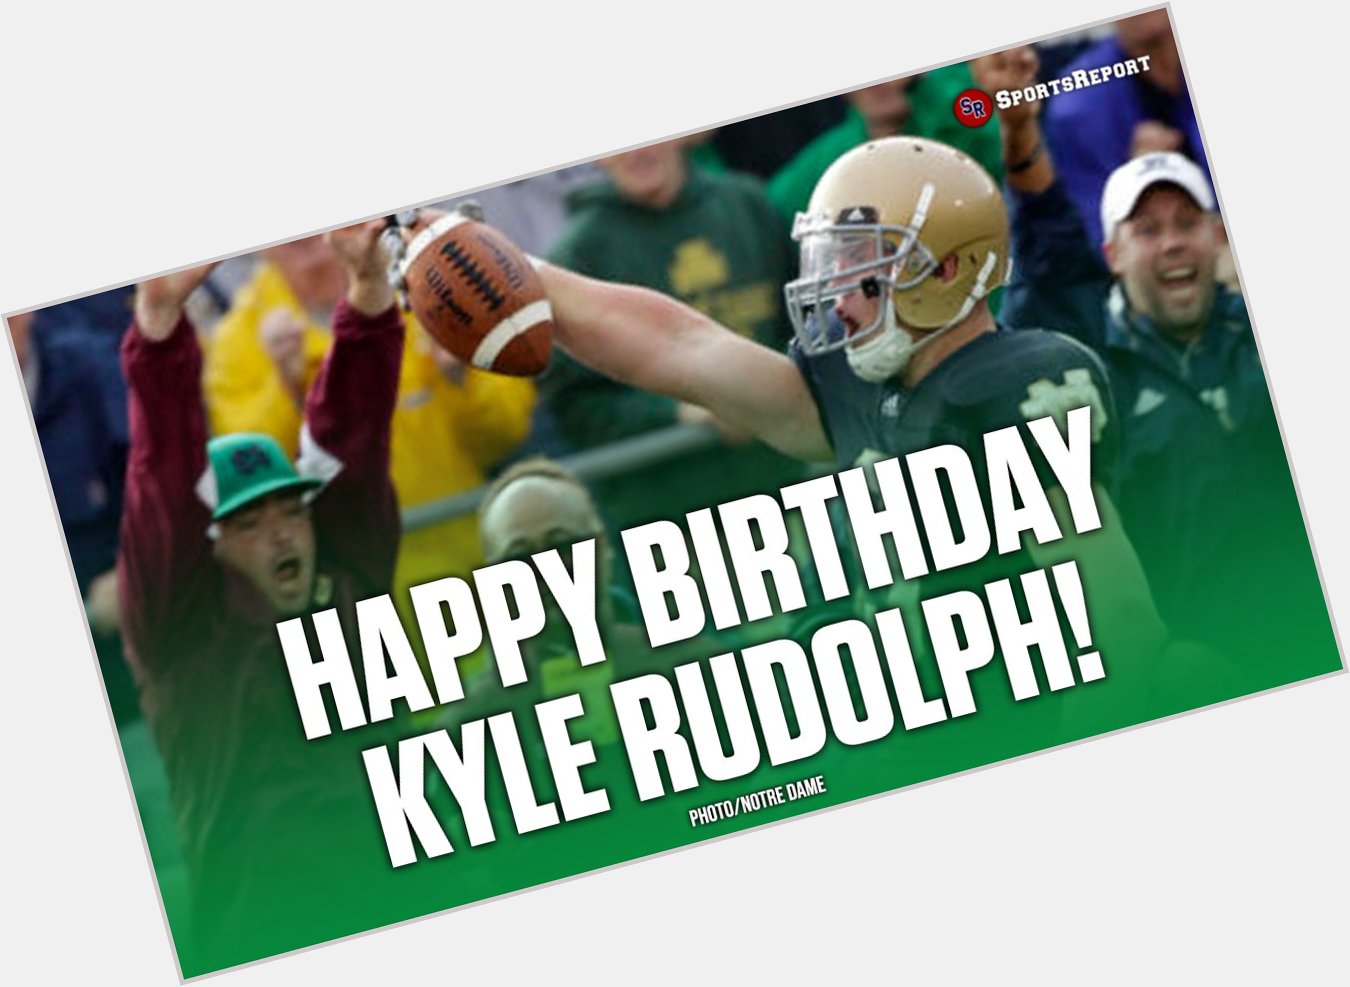  Fans, let\s wish Kyle Rudolph a Happy Birthday! 